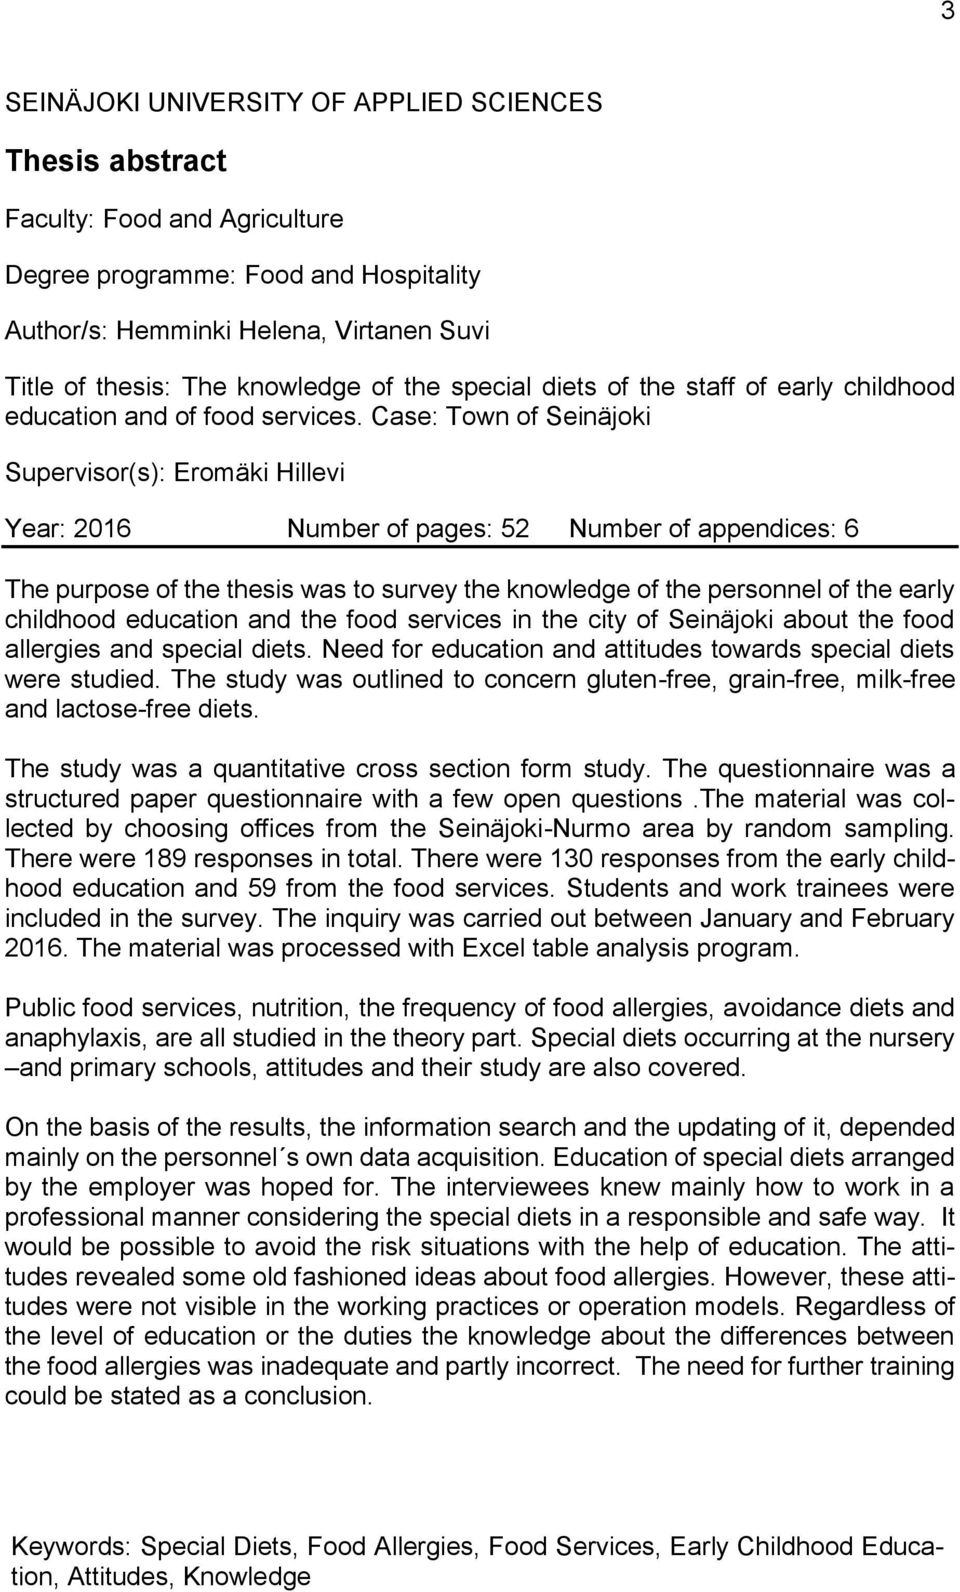 Case: Town of Seinäjoki Supervisor(s): Eromäki Hillevi Year: 2016 Number of pages: 52 Number of appendices: 6 The purpose of the thesis was to survey the knowledge of the personnel of the early